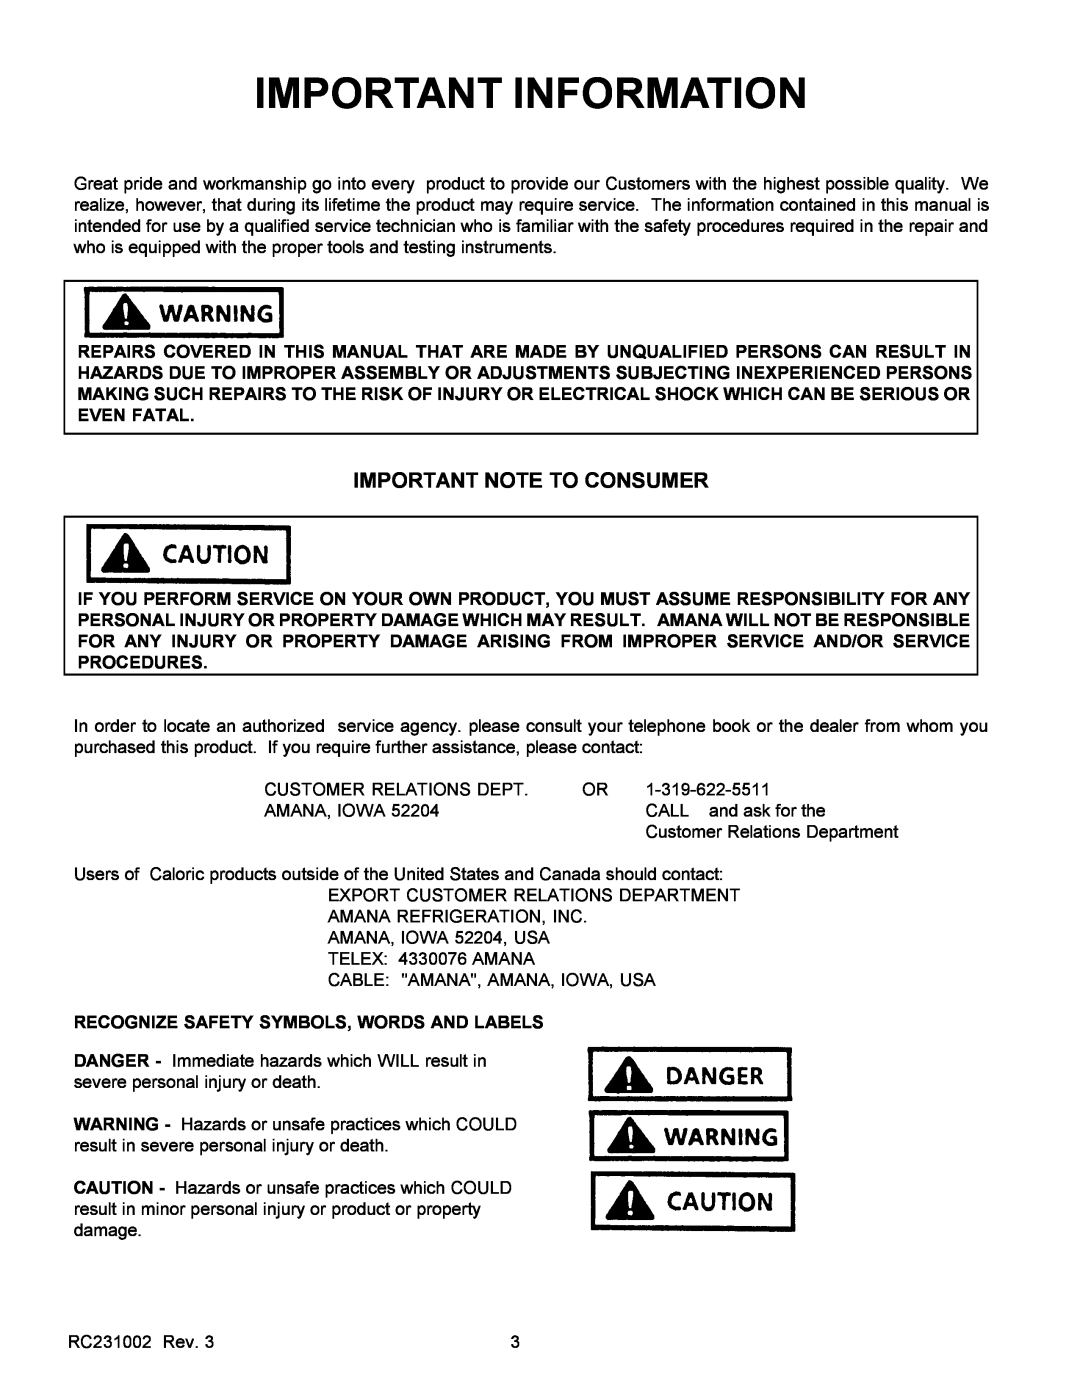 Amana RSS, RST service manual Important Note To Consumer, Recognize Safety Symbols, Words And Labels, Important Information 